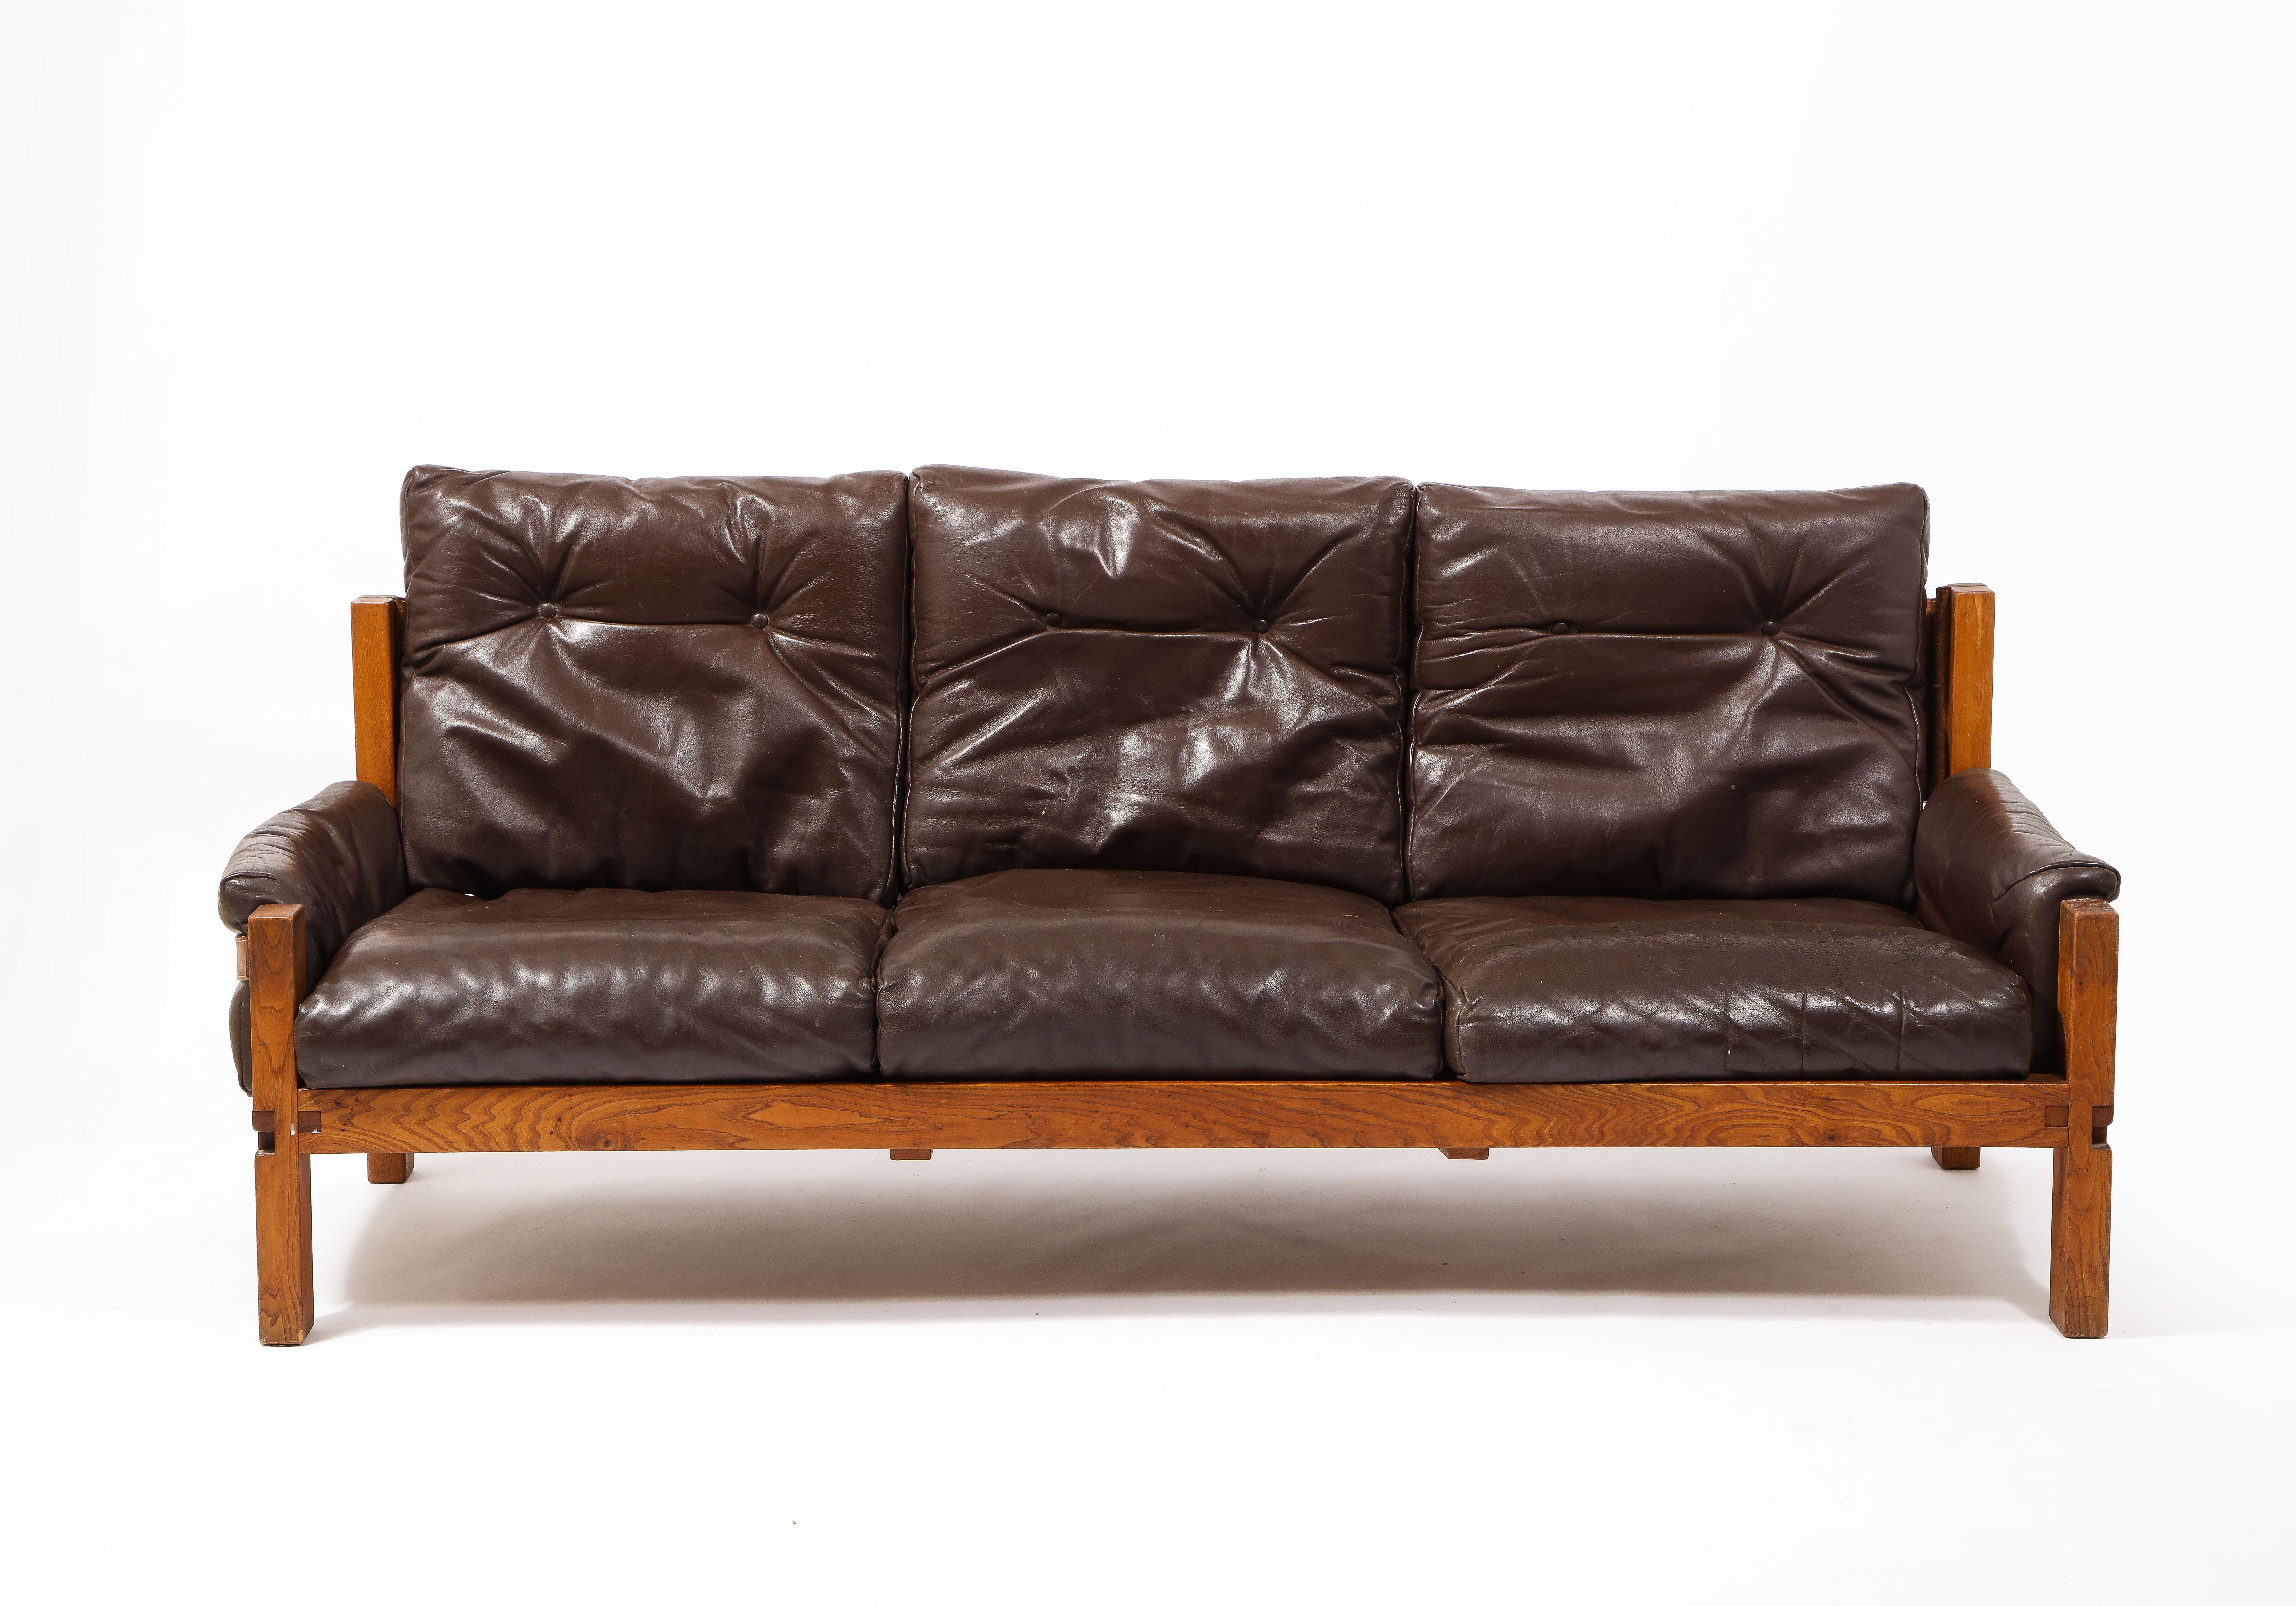 The largest of the S22 series with three-seat. This sofa is all original with down filled leather cushions and original elm frame.